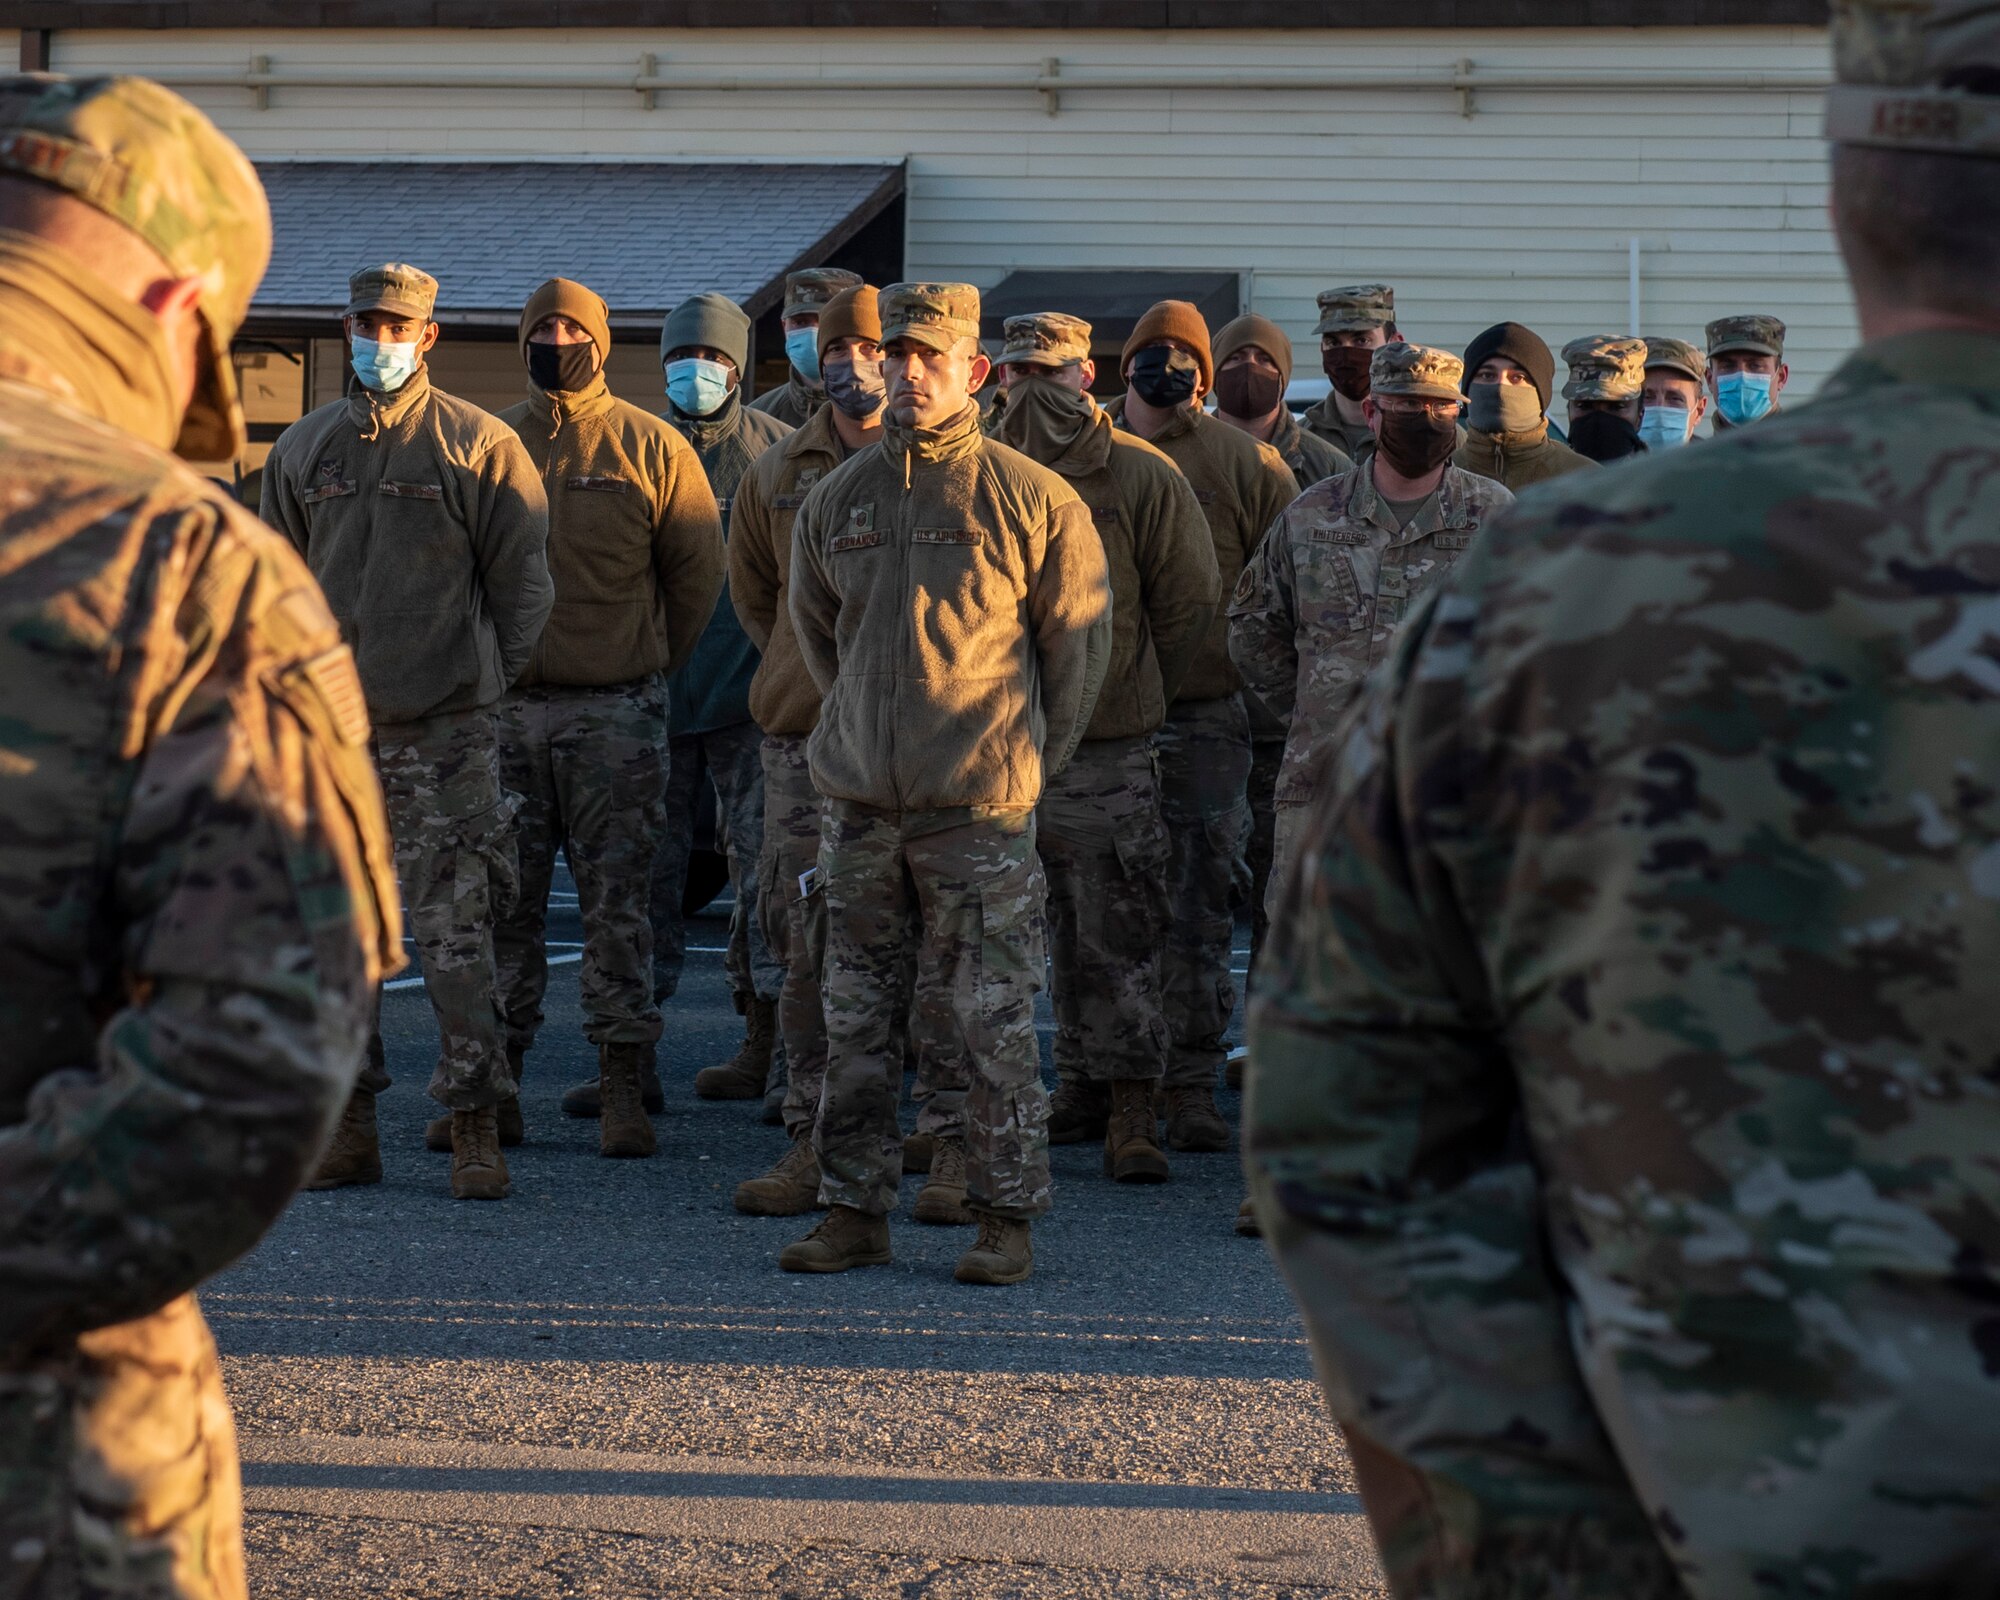 Airmen from the 4th Civil Engineer Squadron stand in formation at Seymour Johnson Air Force Base, North Carolina, Nov. 19, 2020.